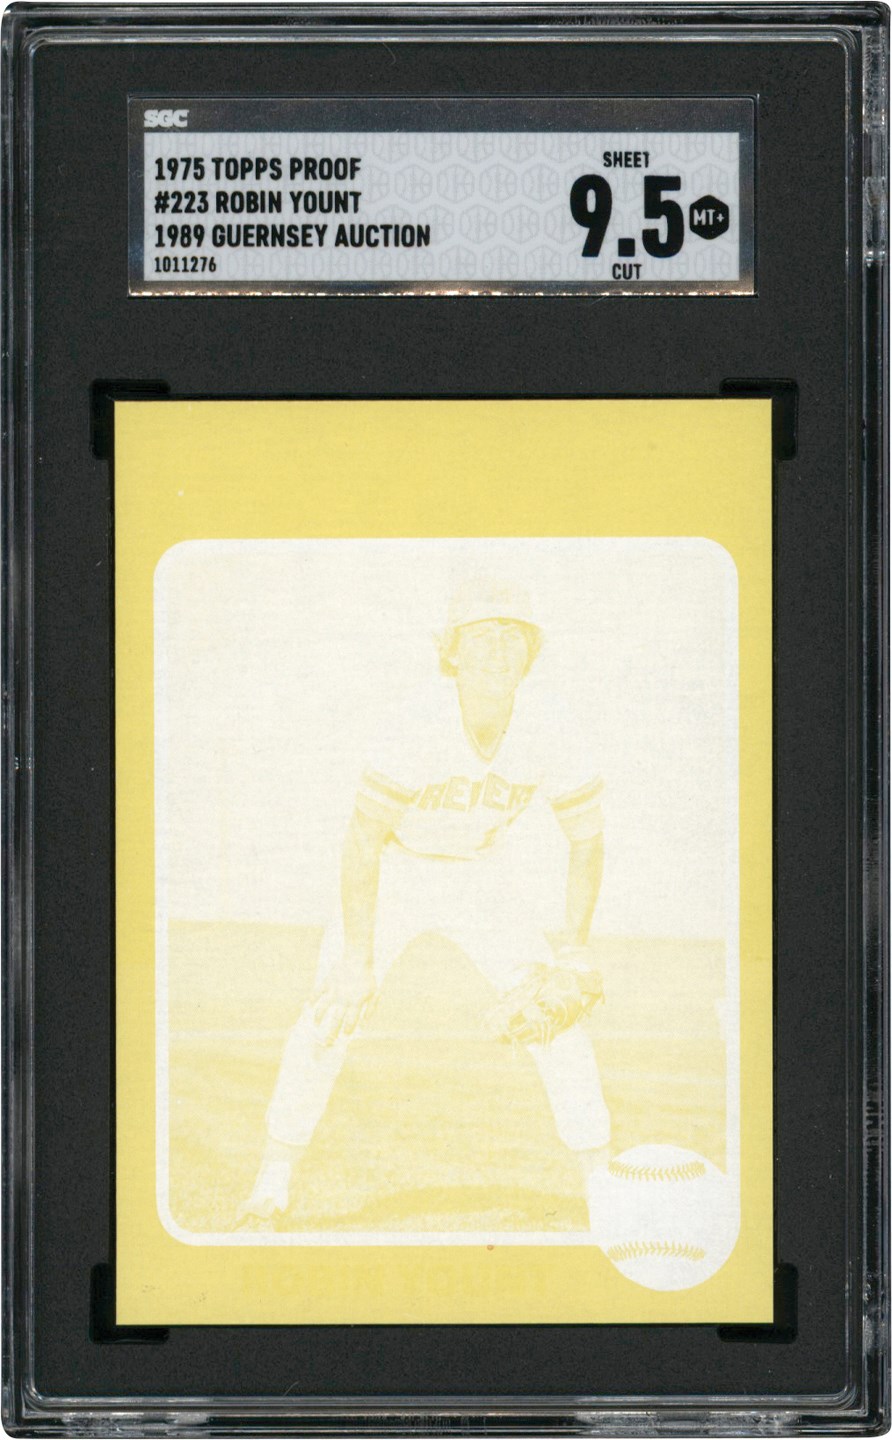 - 1975 Topps Baseball Yellow Proof #223 Robin Yount Rookie Card "1/1" SGC MINT+ 9.5 (ex-1989 Guernsey Auction)